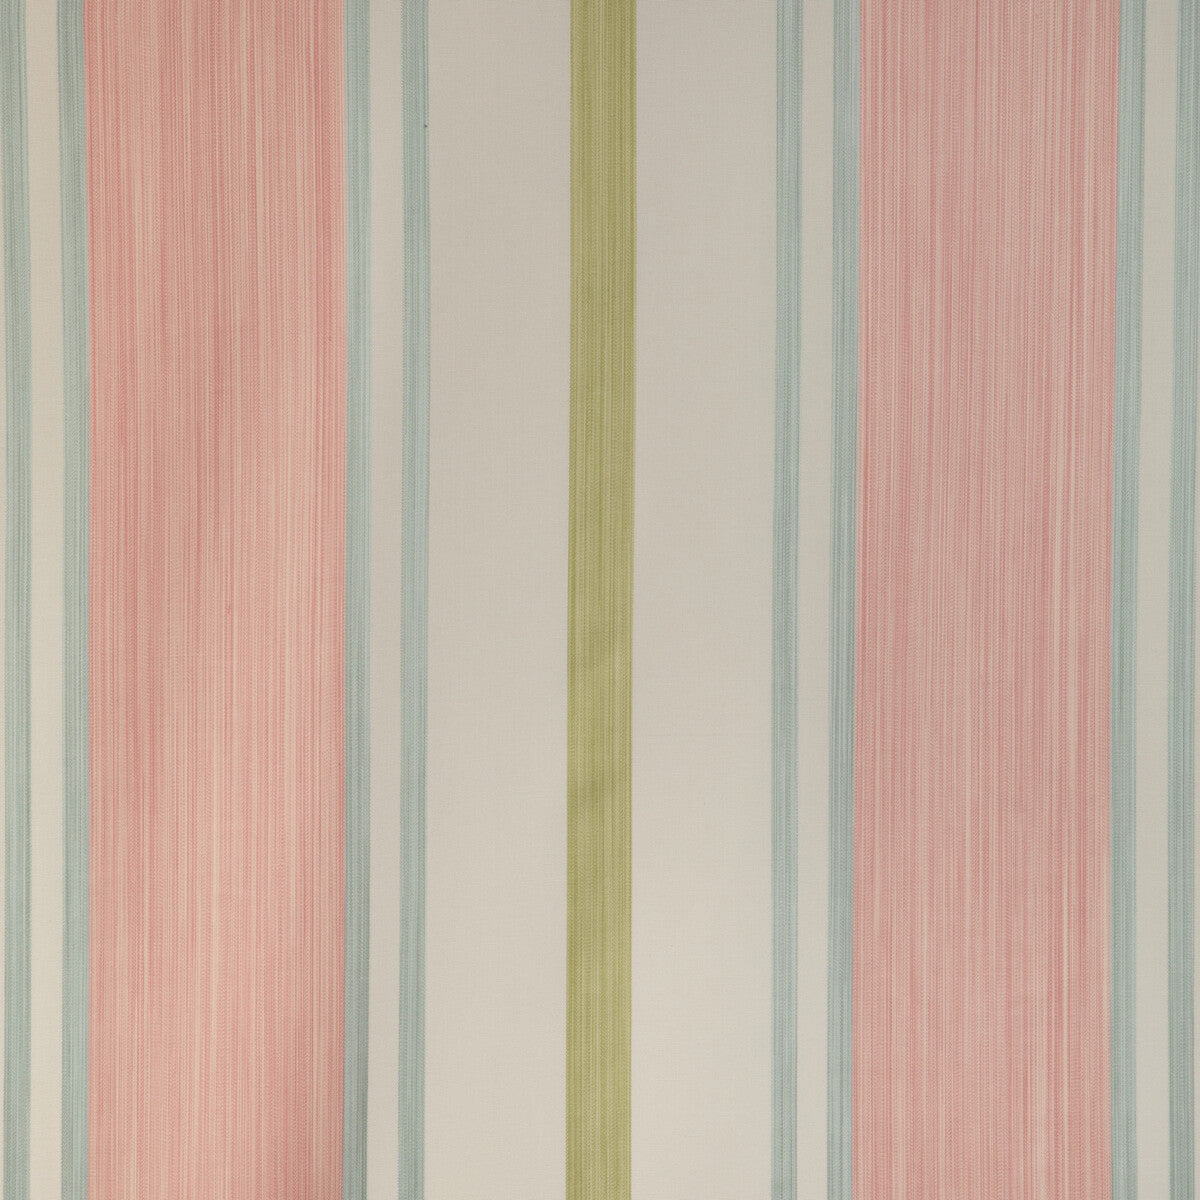 Davies Stripe fabric in petal/kiwi color - pattern 2023110.73.0 - by Lee Jofa in the Highfield Stripes And Plaids collection